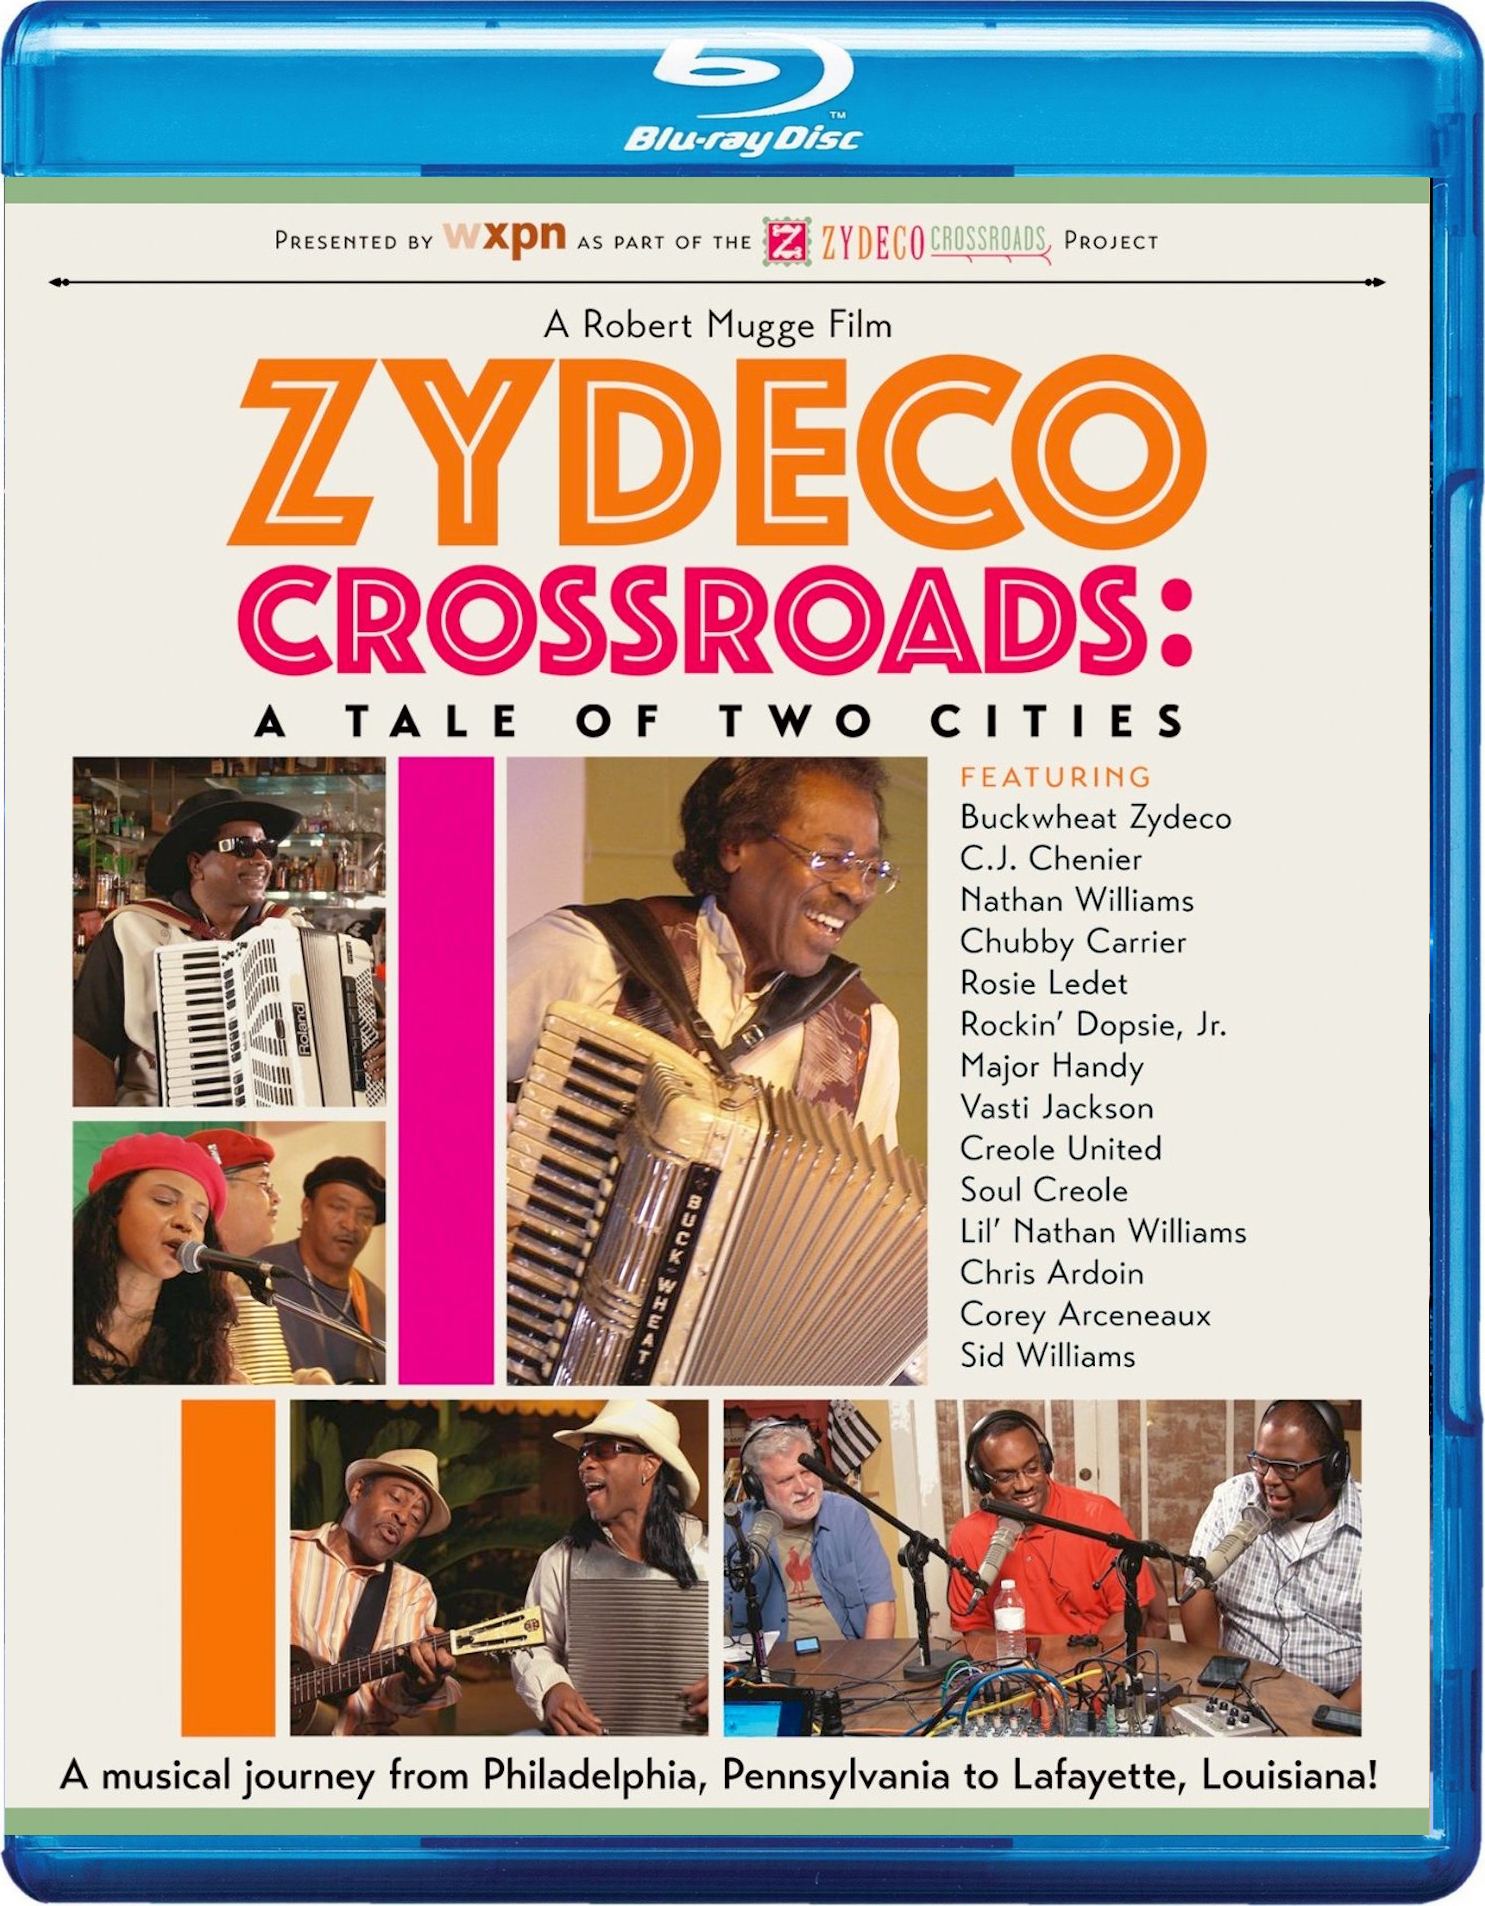 zydeco crossroads: a tale of two cities